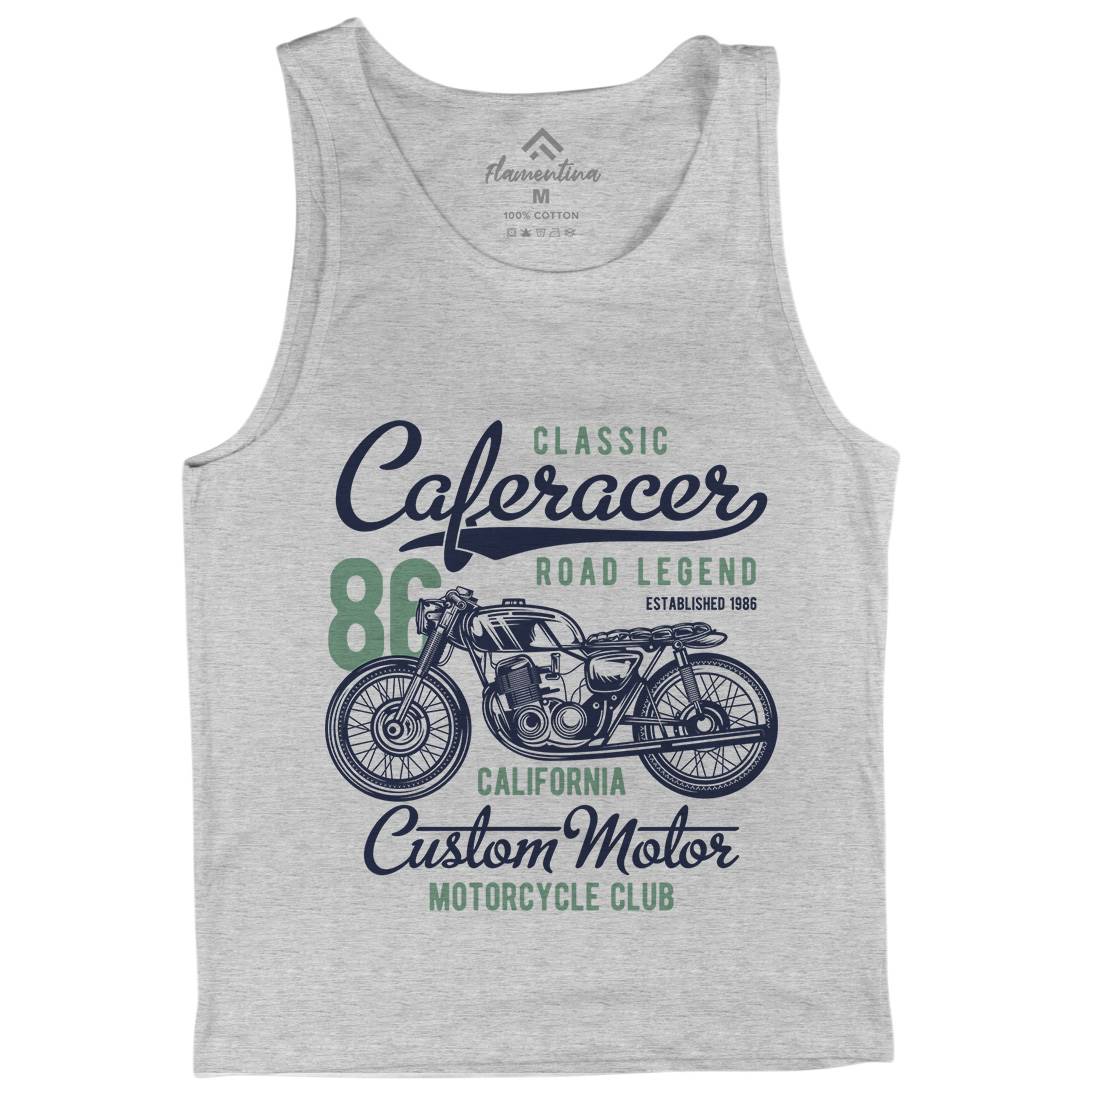 Caferacer Mens Tank Top Vest Motorcycles B834